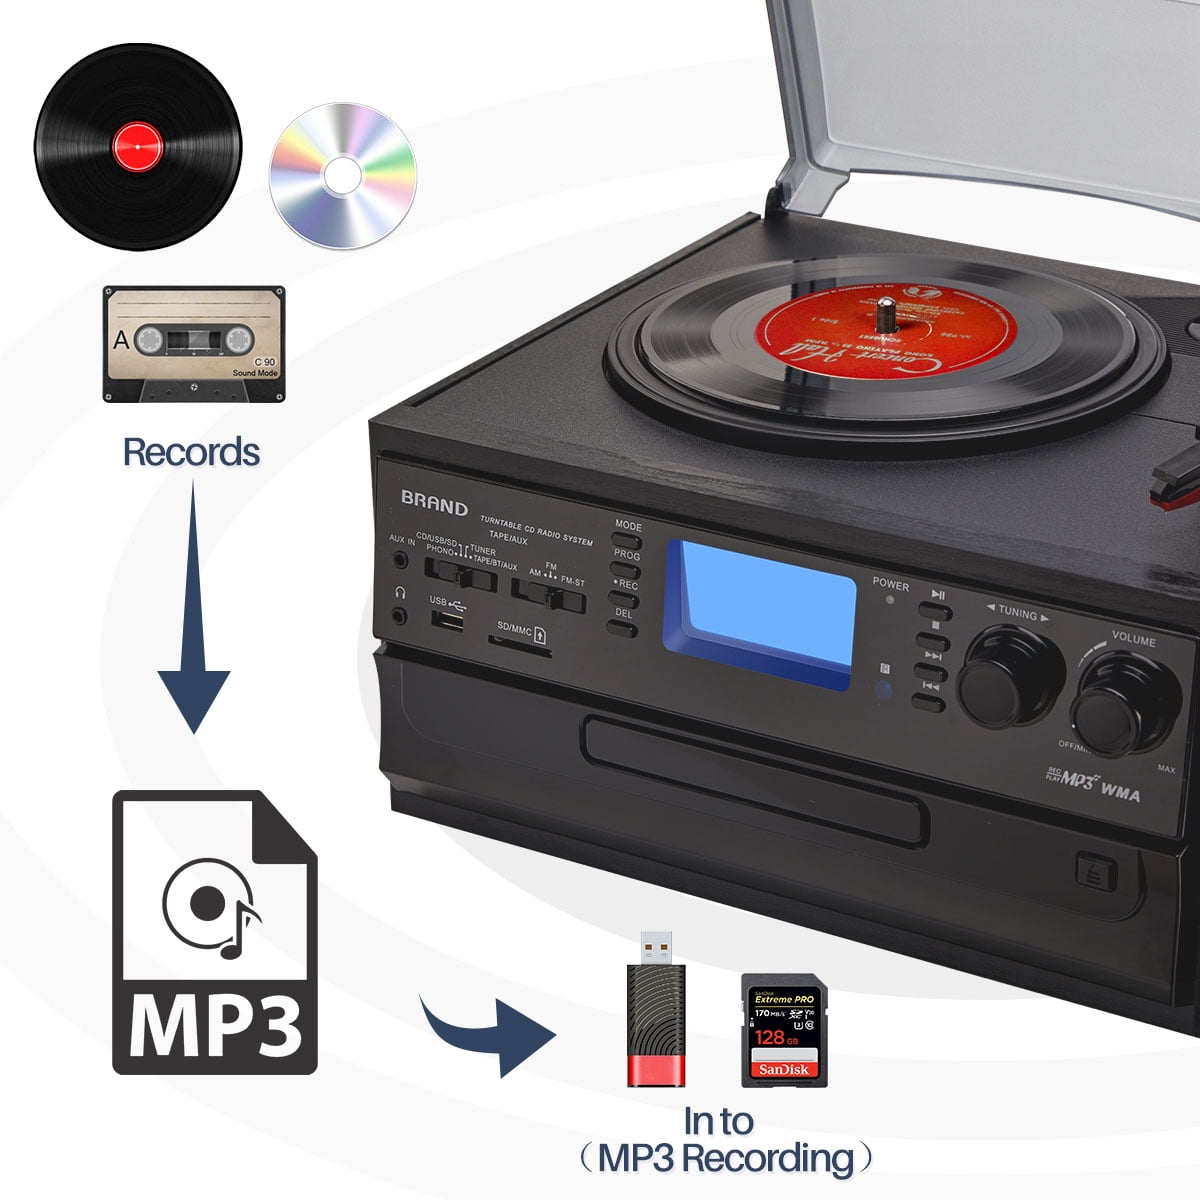 Nostalgic Turntable for Vinyl Record with Bluetooth USB ORCC 10-in-1 Record Player SD Slot Remote Control 2 Built-in Speakers CD AM/FM Radio Cassette 